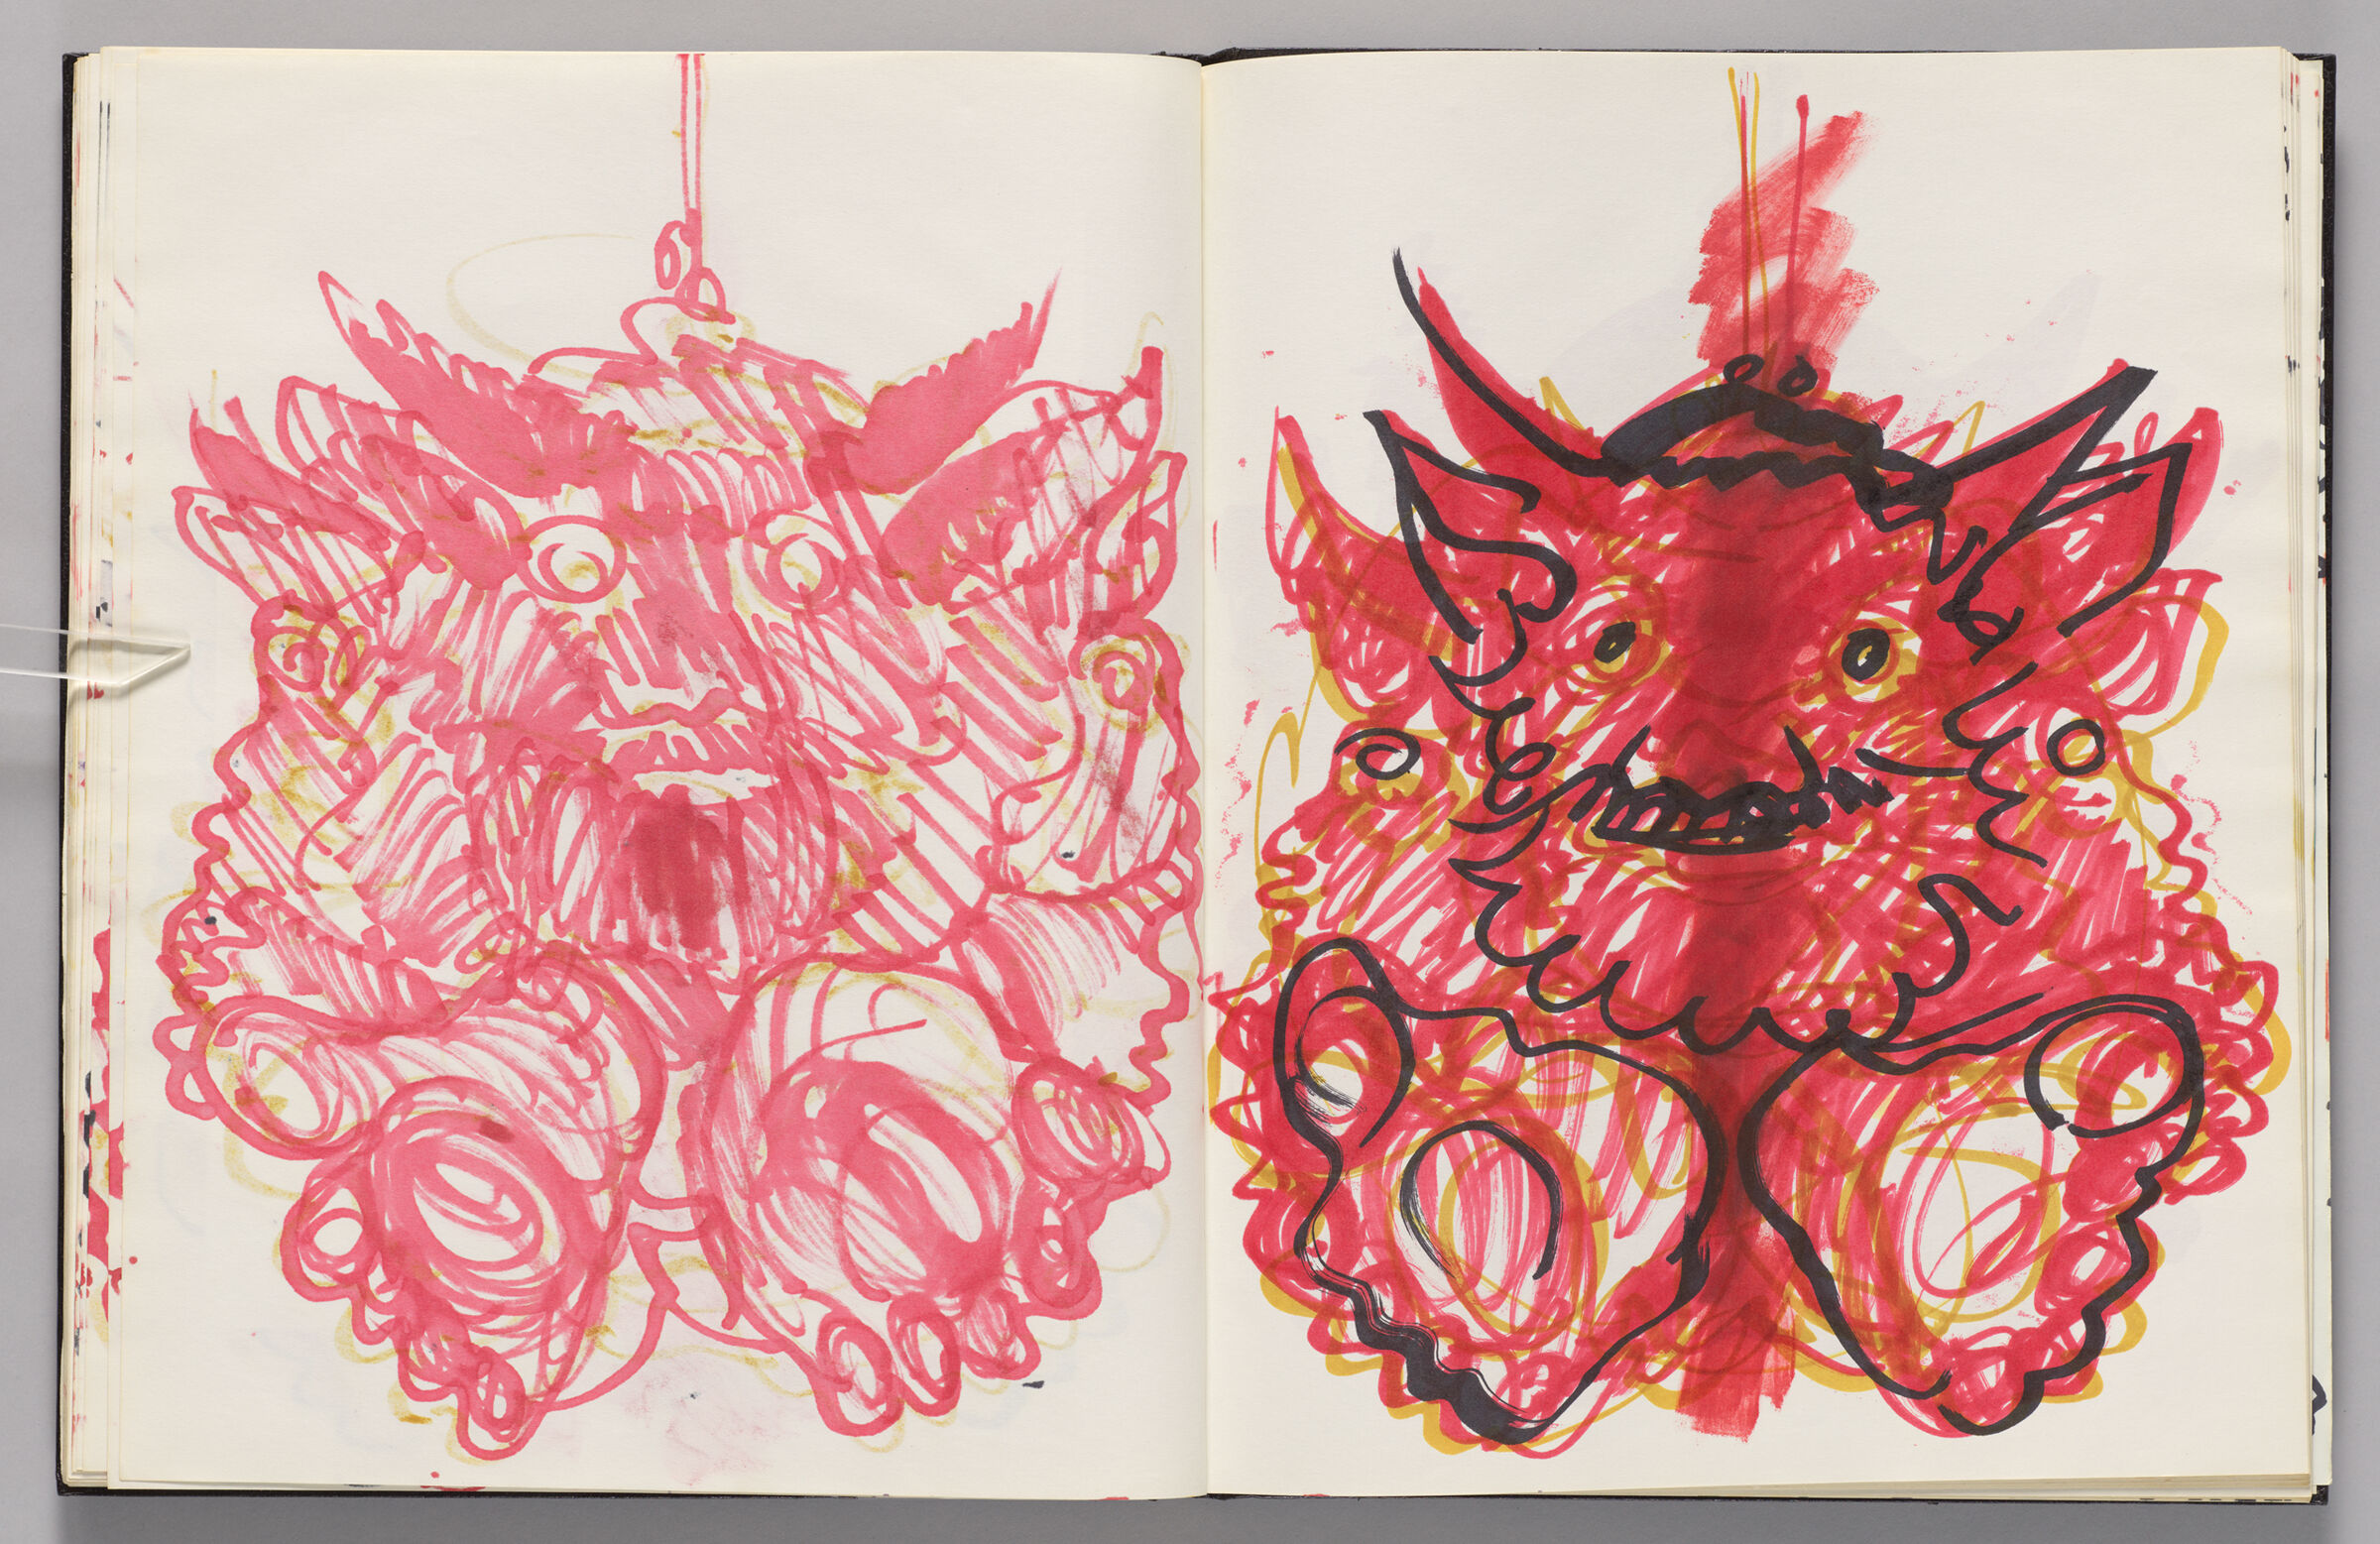 Untitled (Bleed-Through Of Previous Page, Left Page); Untitled (Close-Up Of Minotaurs, Right Page)